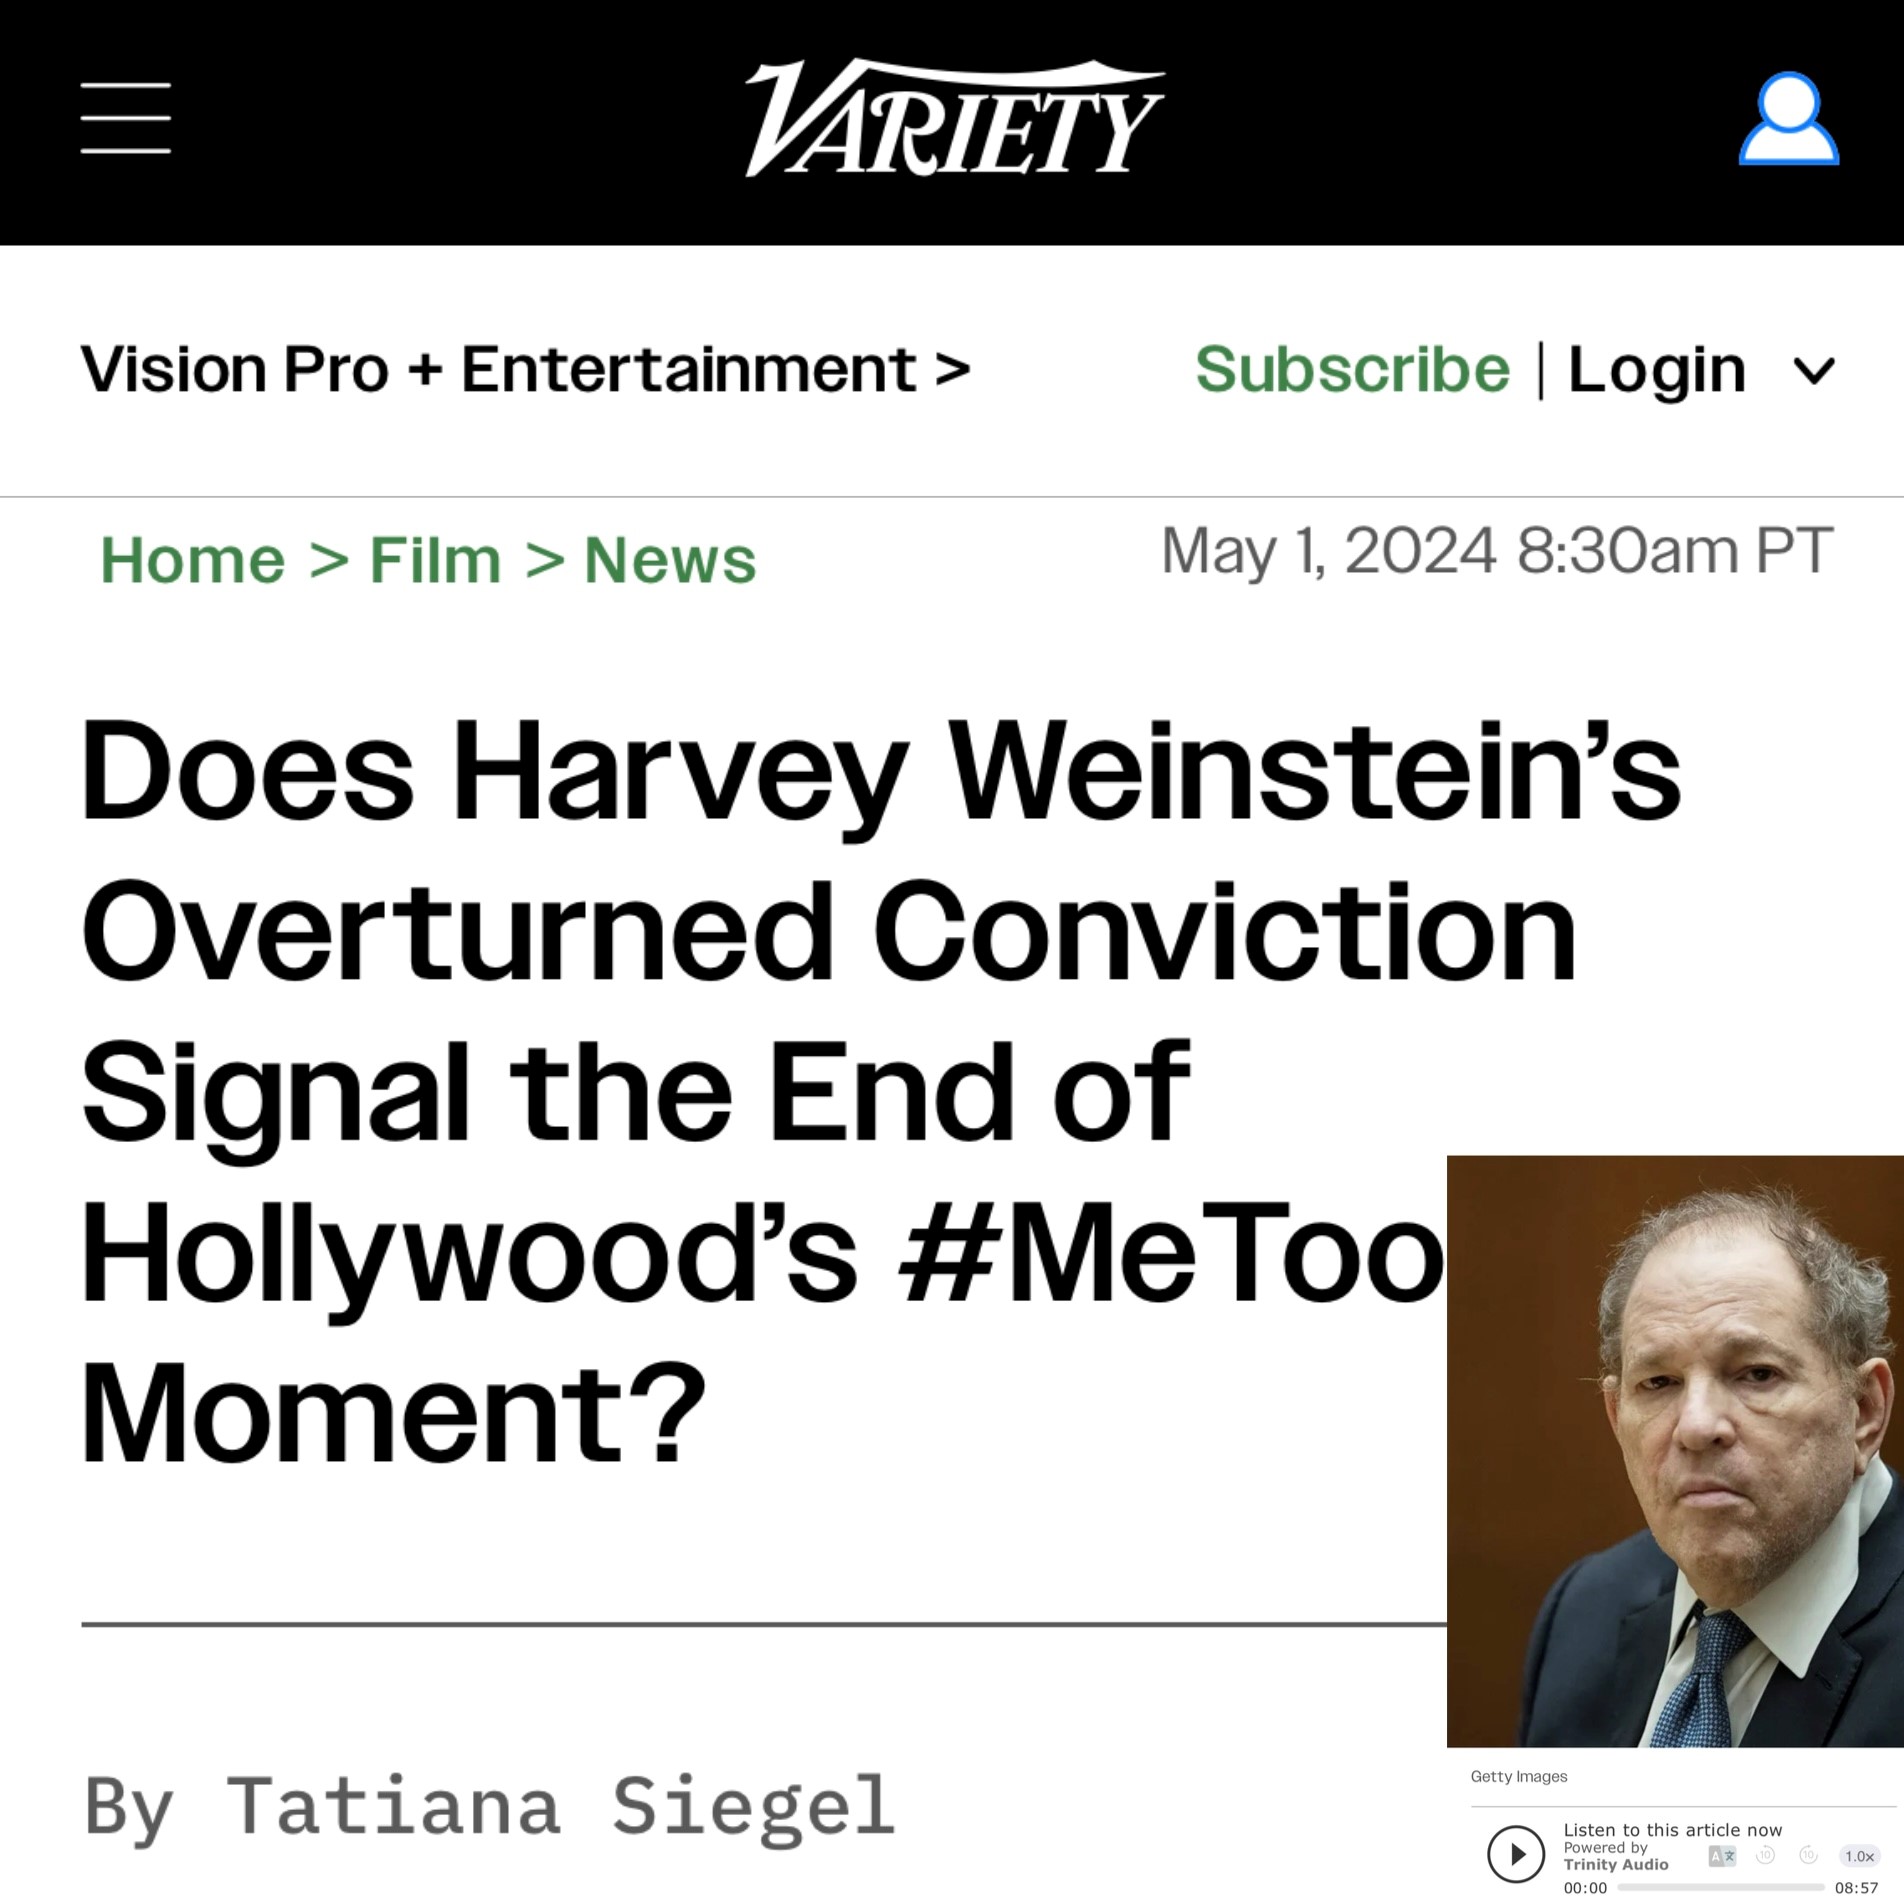 RPJ Partner Nicole Page Featured in Variety Article “Does Harvey Weinstein’s Overturned Conviction Signal the End of Hollywood’s #MeToo Moment?”